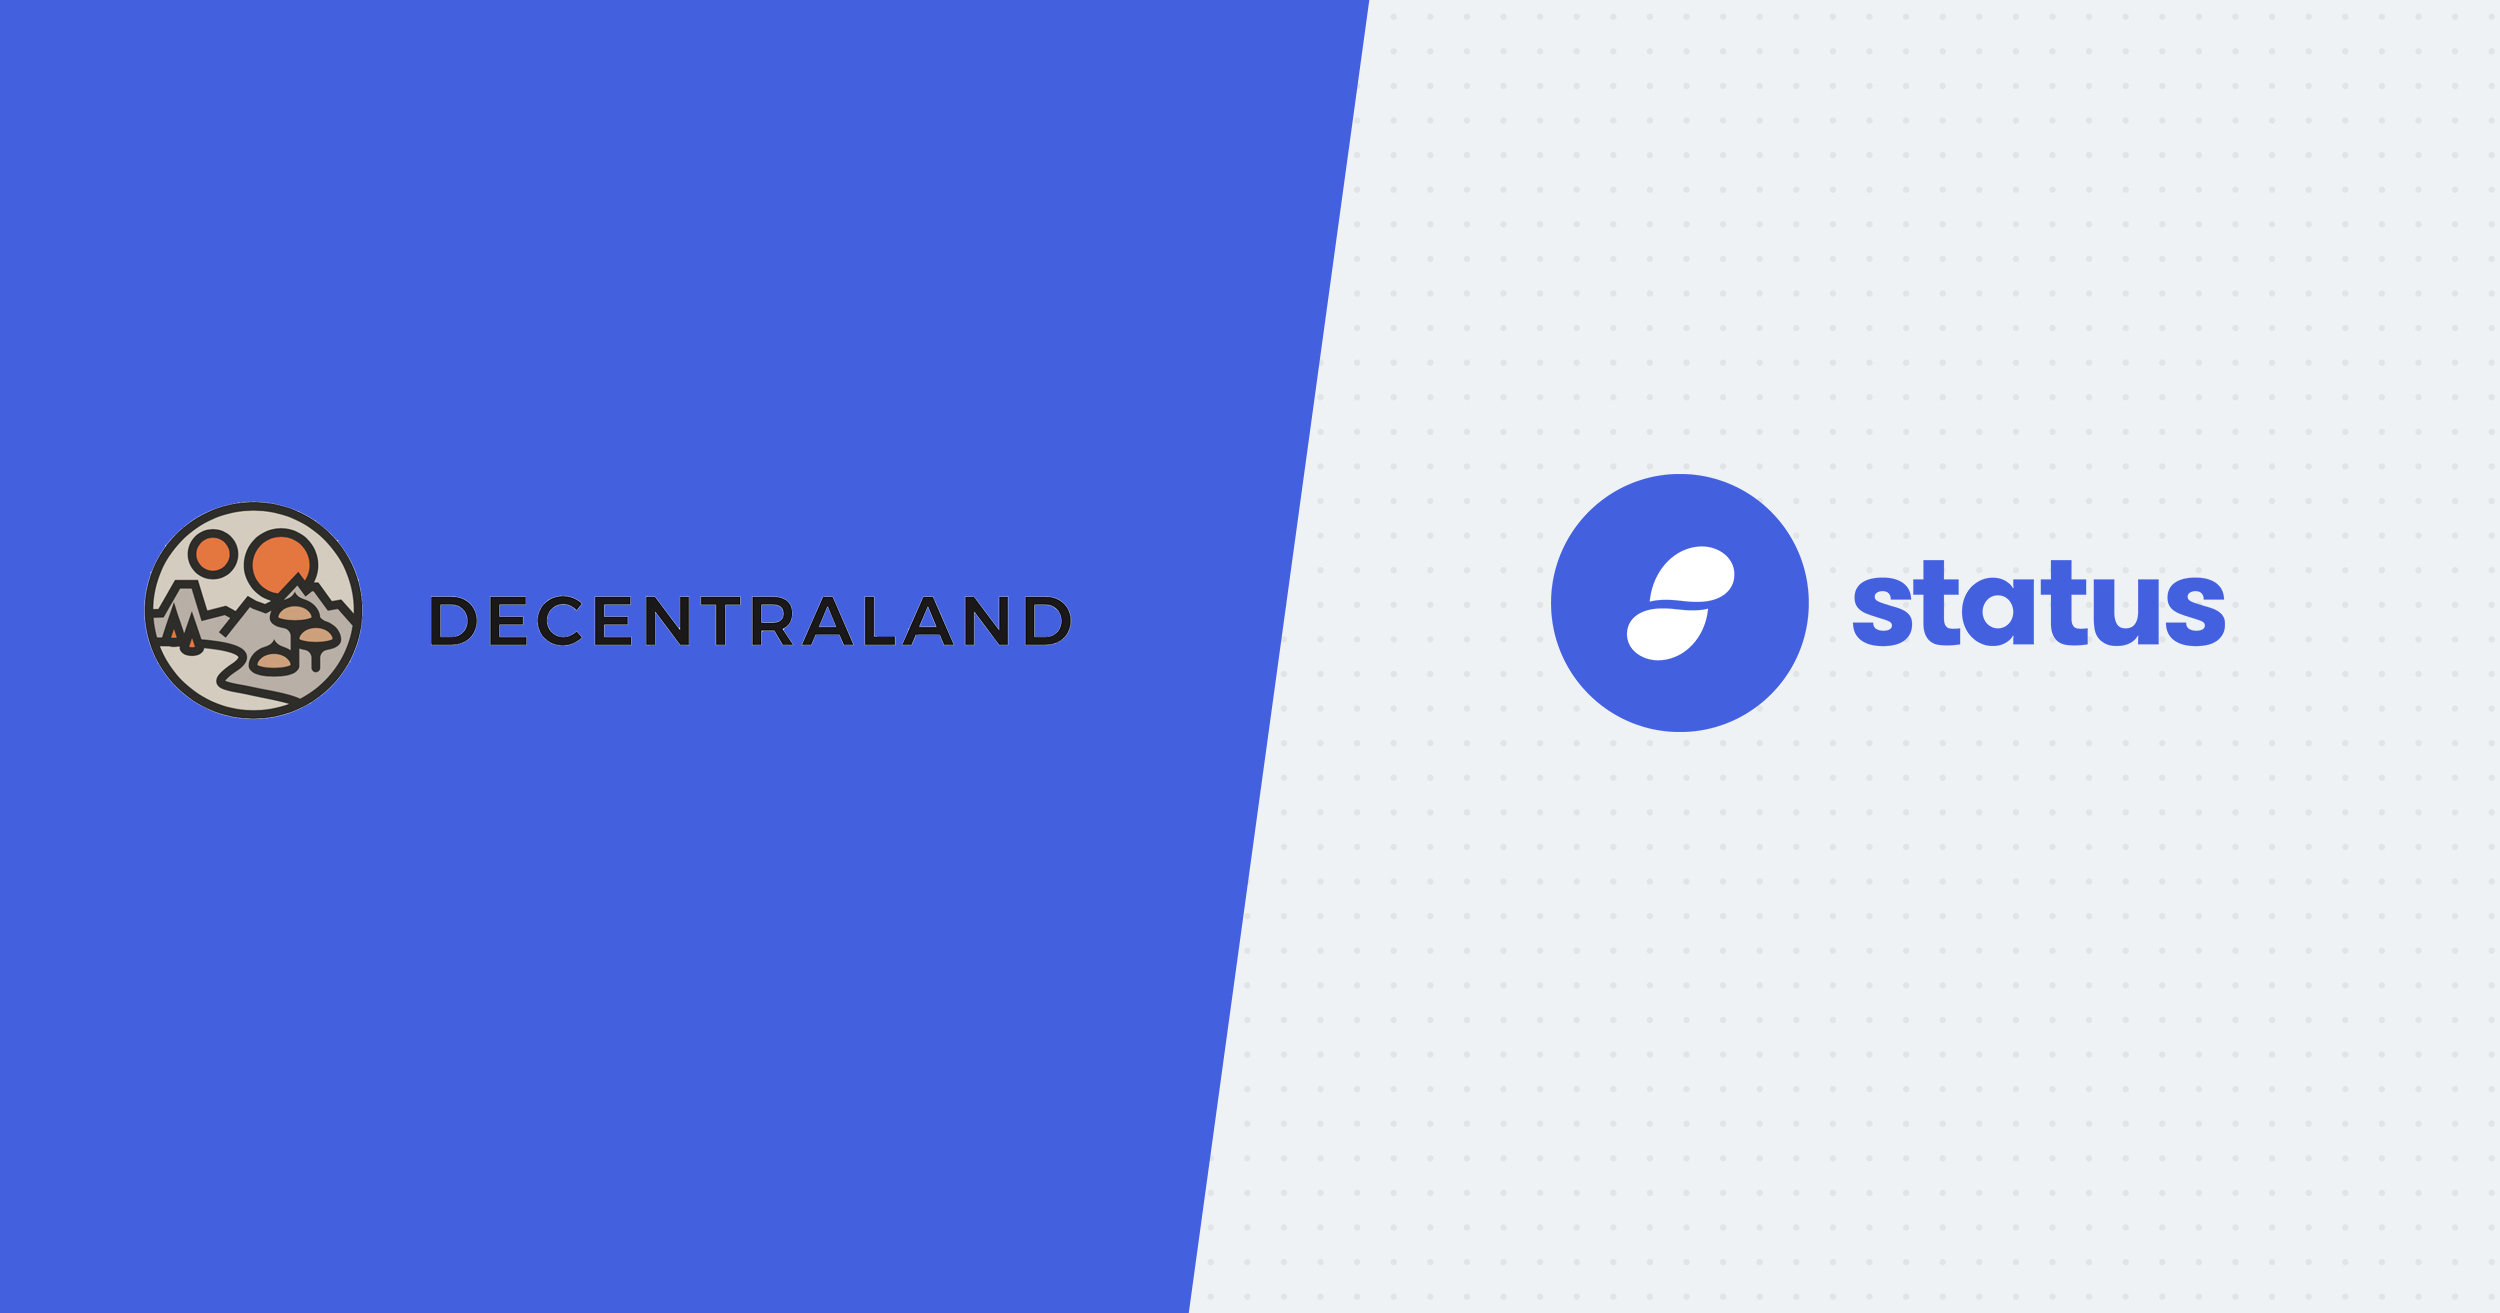 A Strategic Partnership with Decentraland ahead of their next LAND Auction